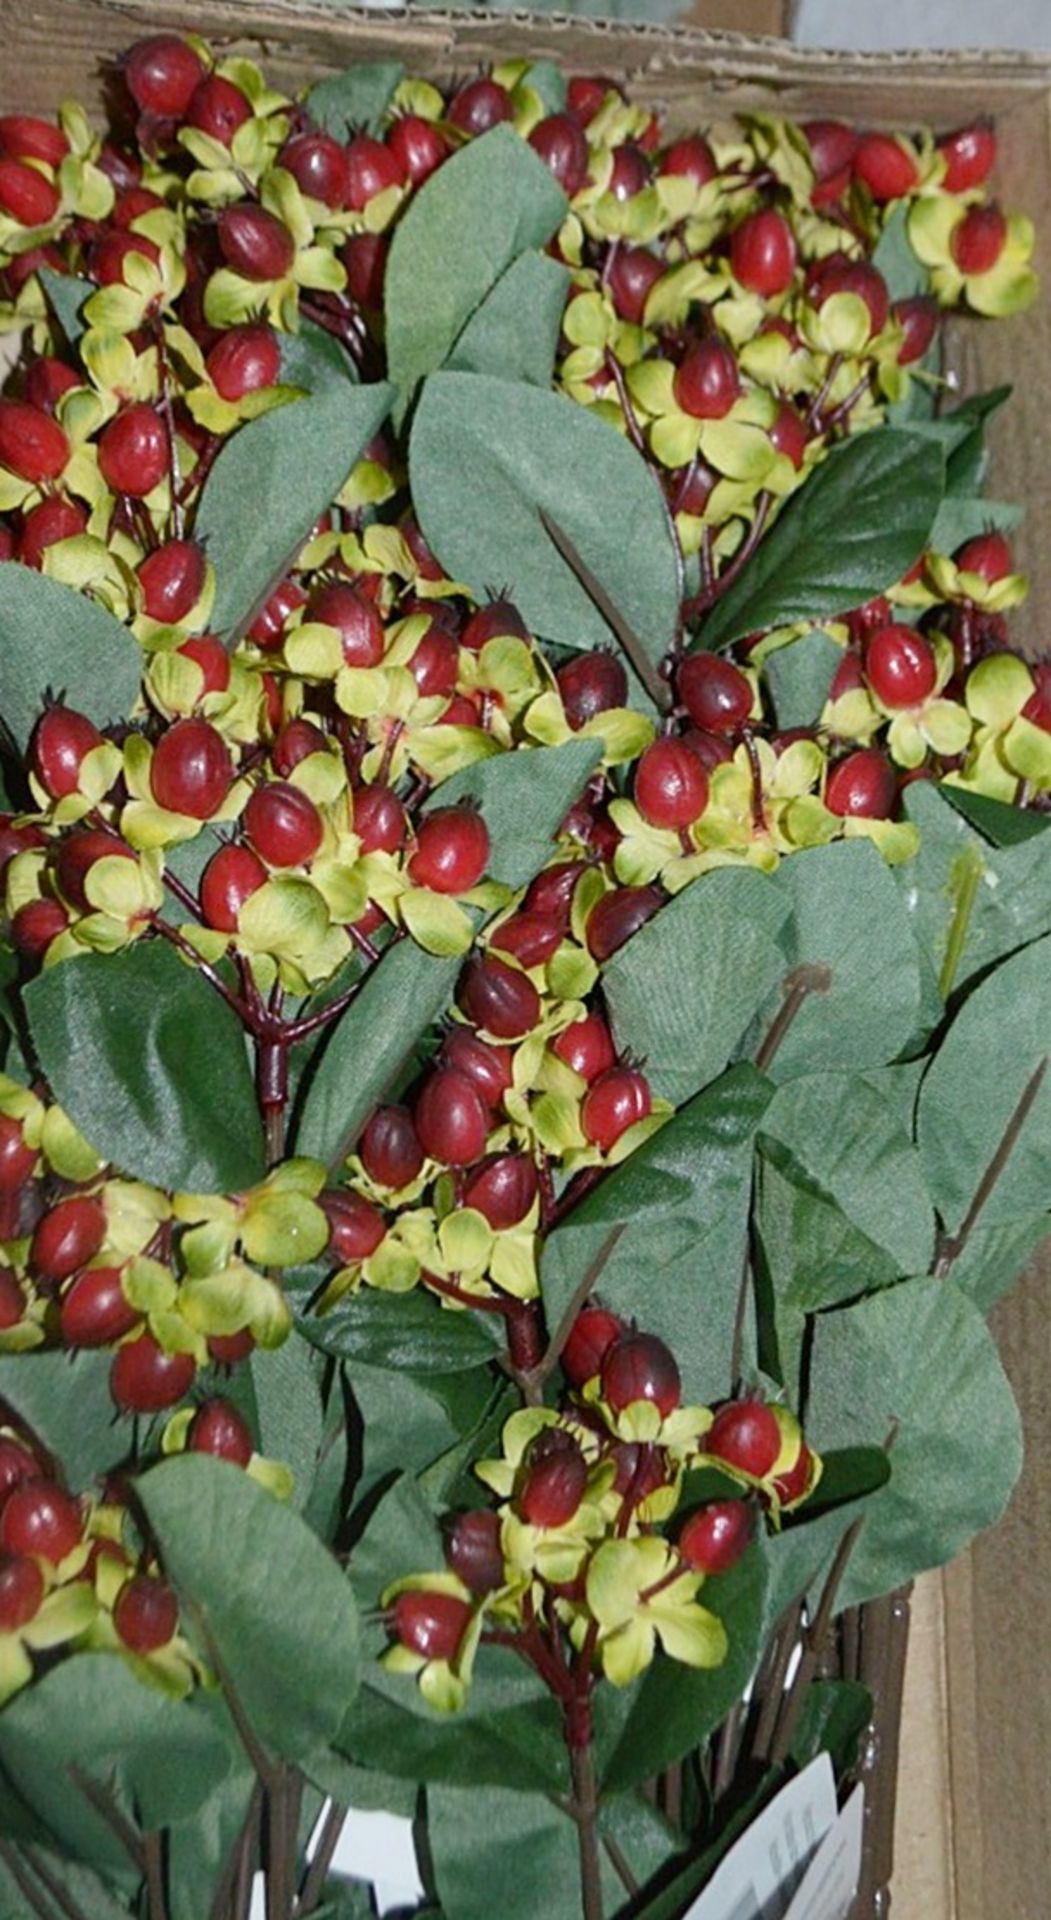 105 x Luxury Artificial Floristry Sprays - Mostly Red Hypericum - 70cm Tall - Total RRP £520.00 - Image 4 of 6